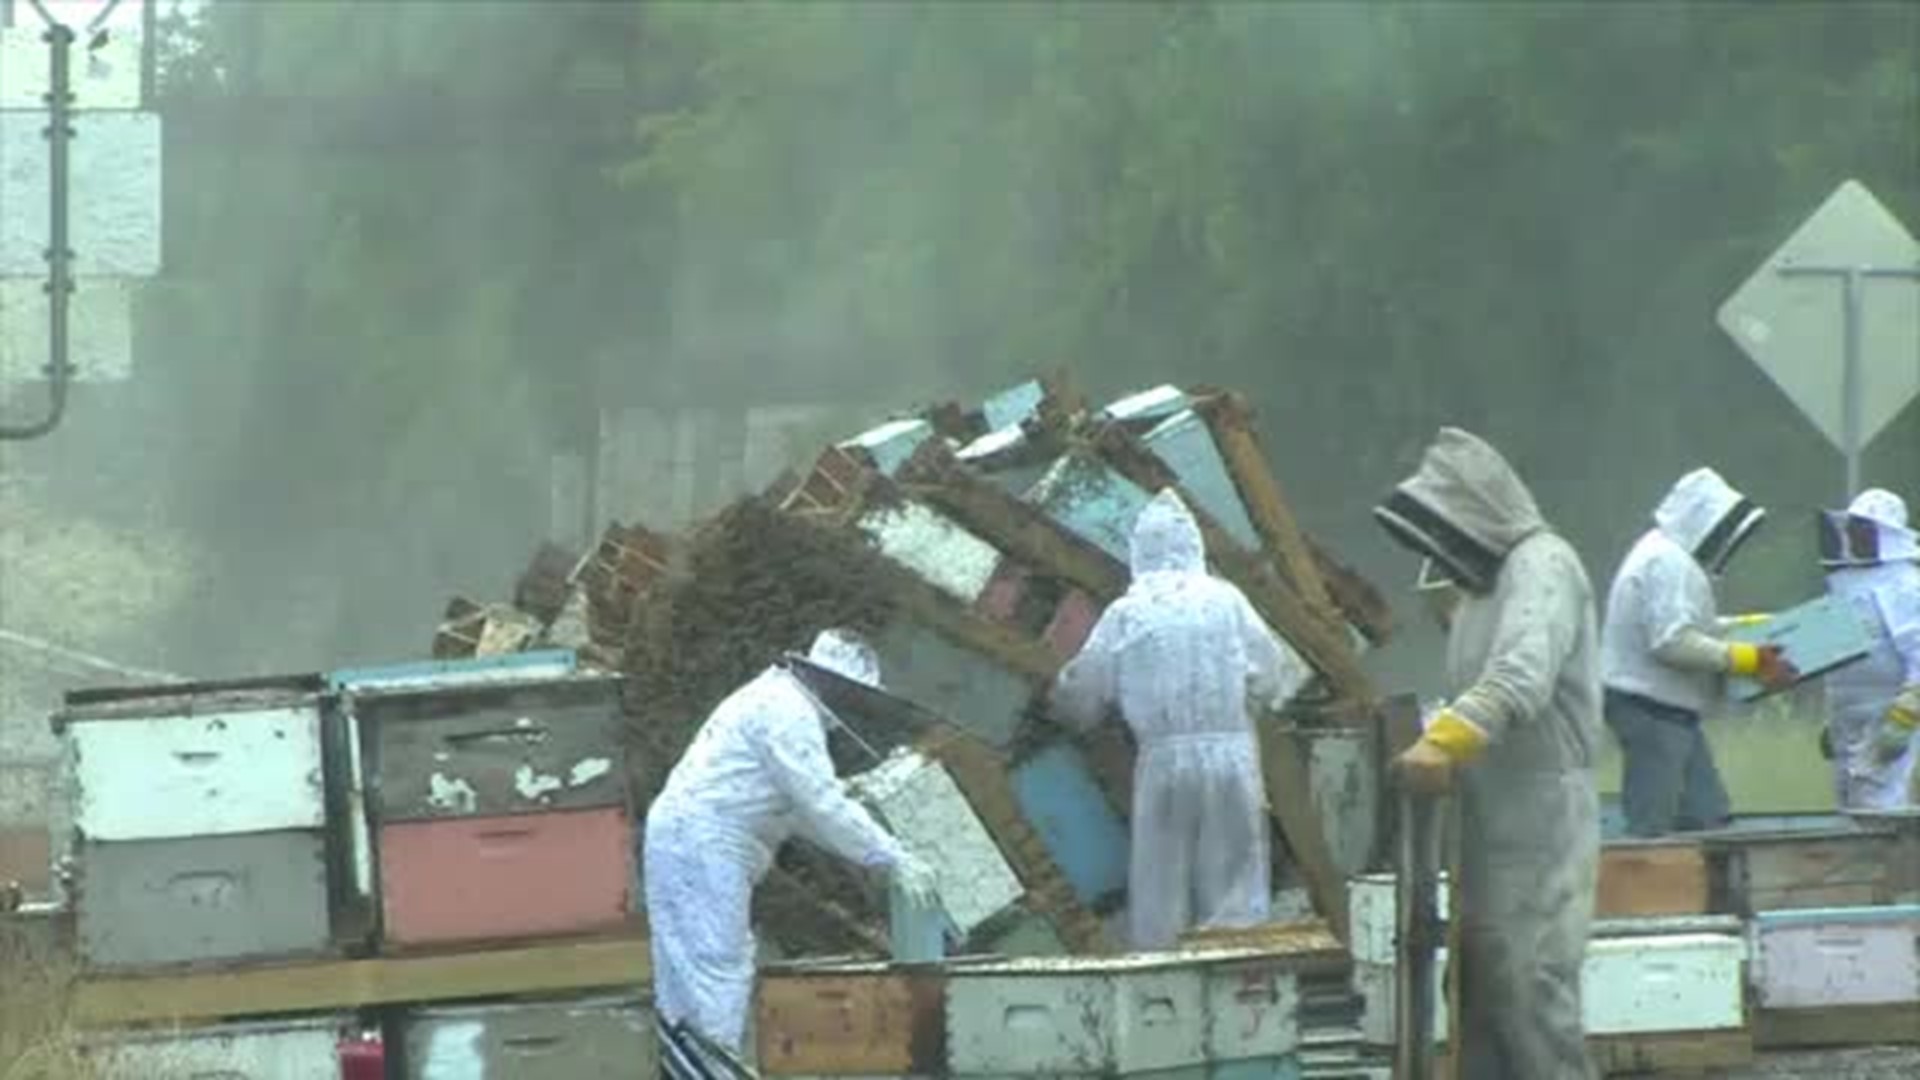 Truck Hauling Millions of Bees Overturns on Texas Highway